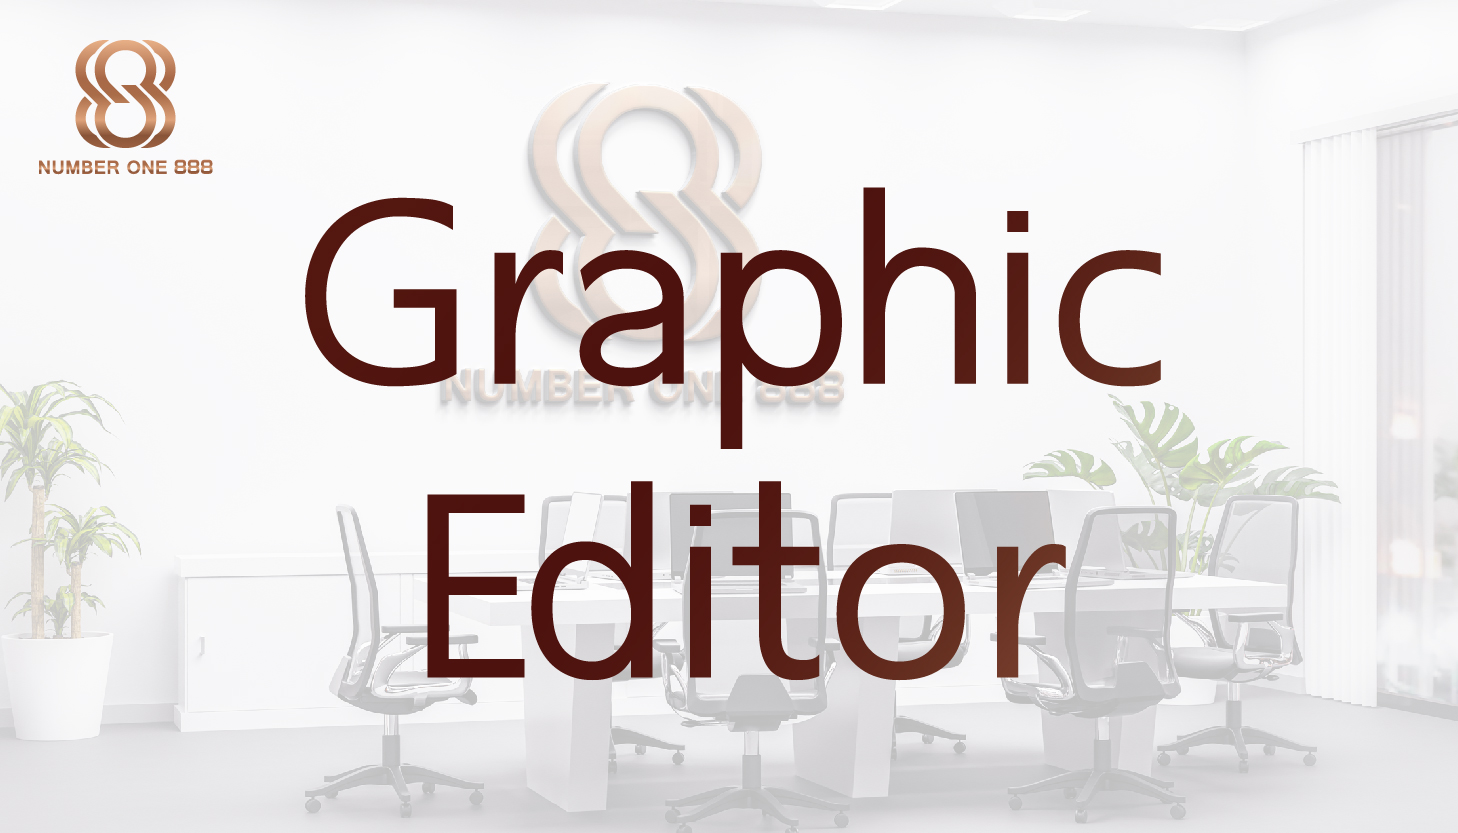 Video Graphic and Editor